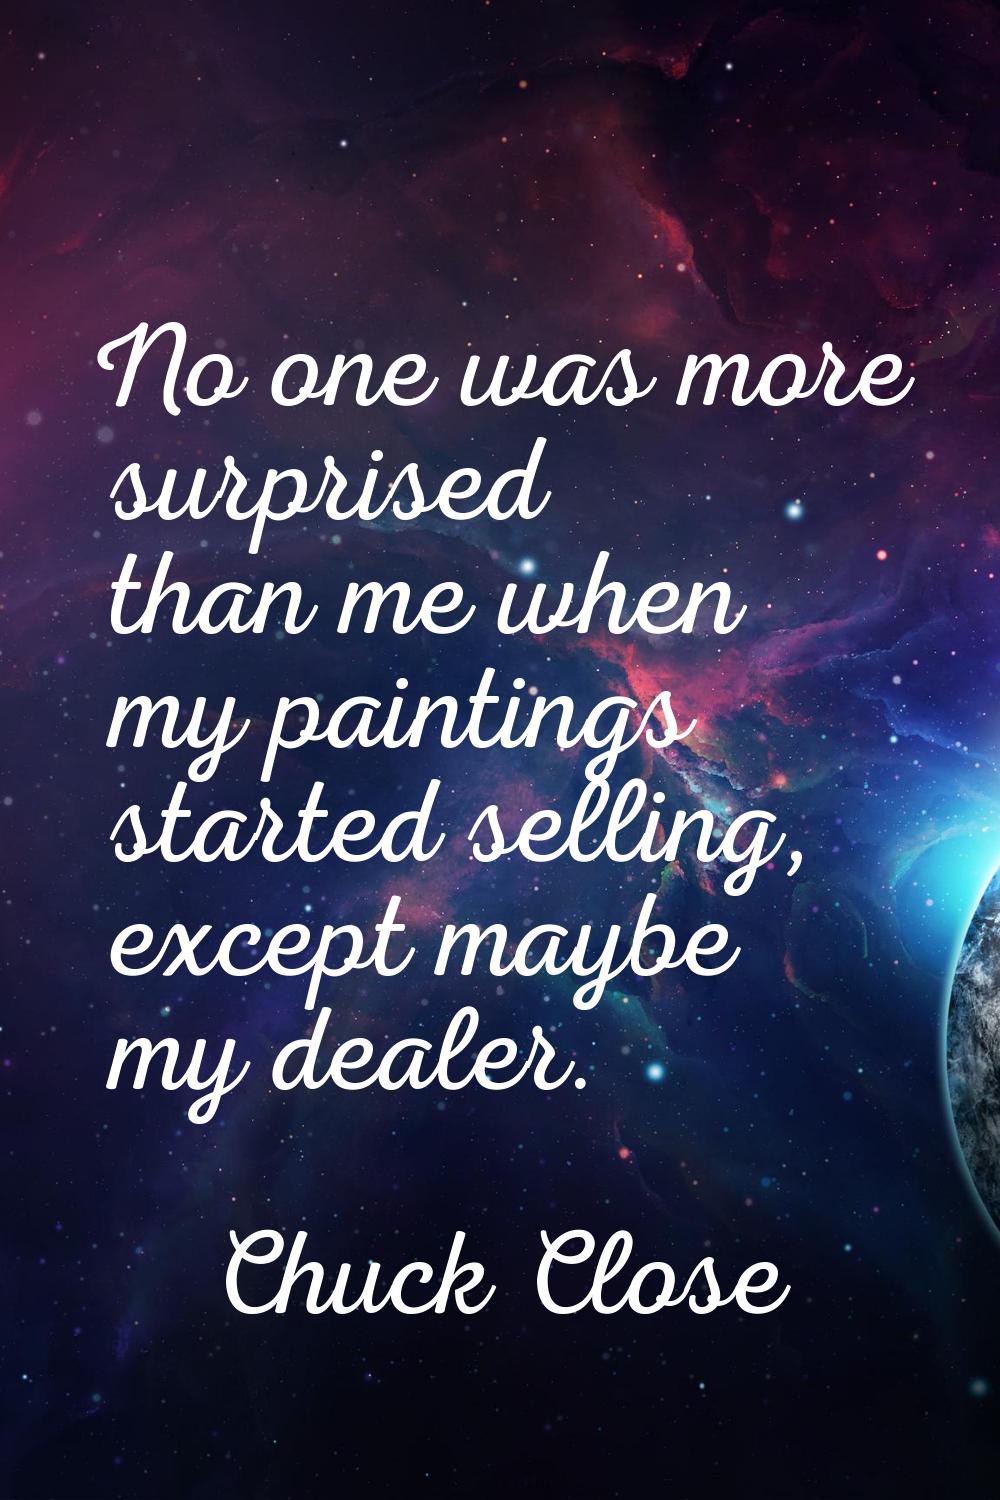 No one was more surprised than me when my paintings started selling, except maybe my dealer.